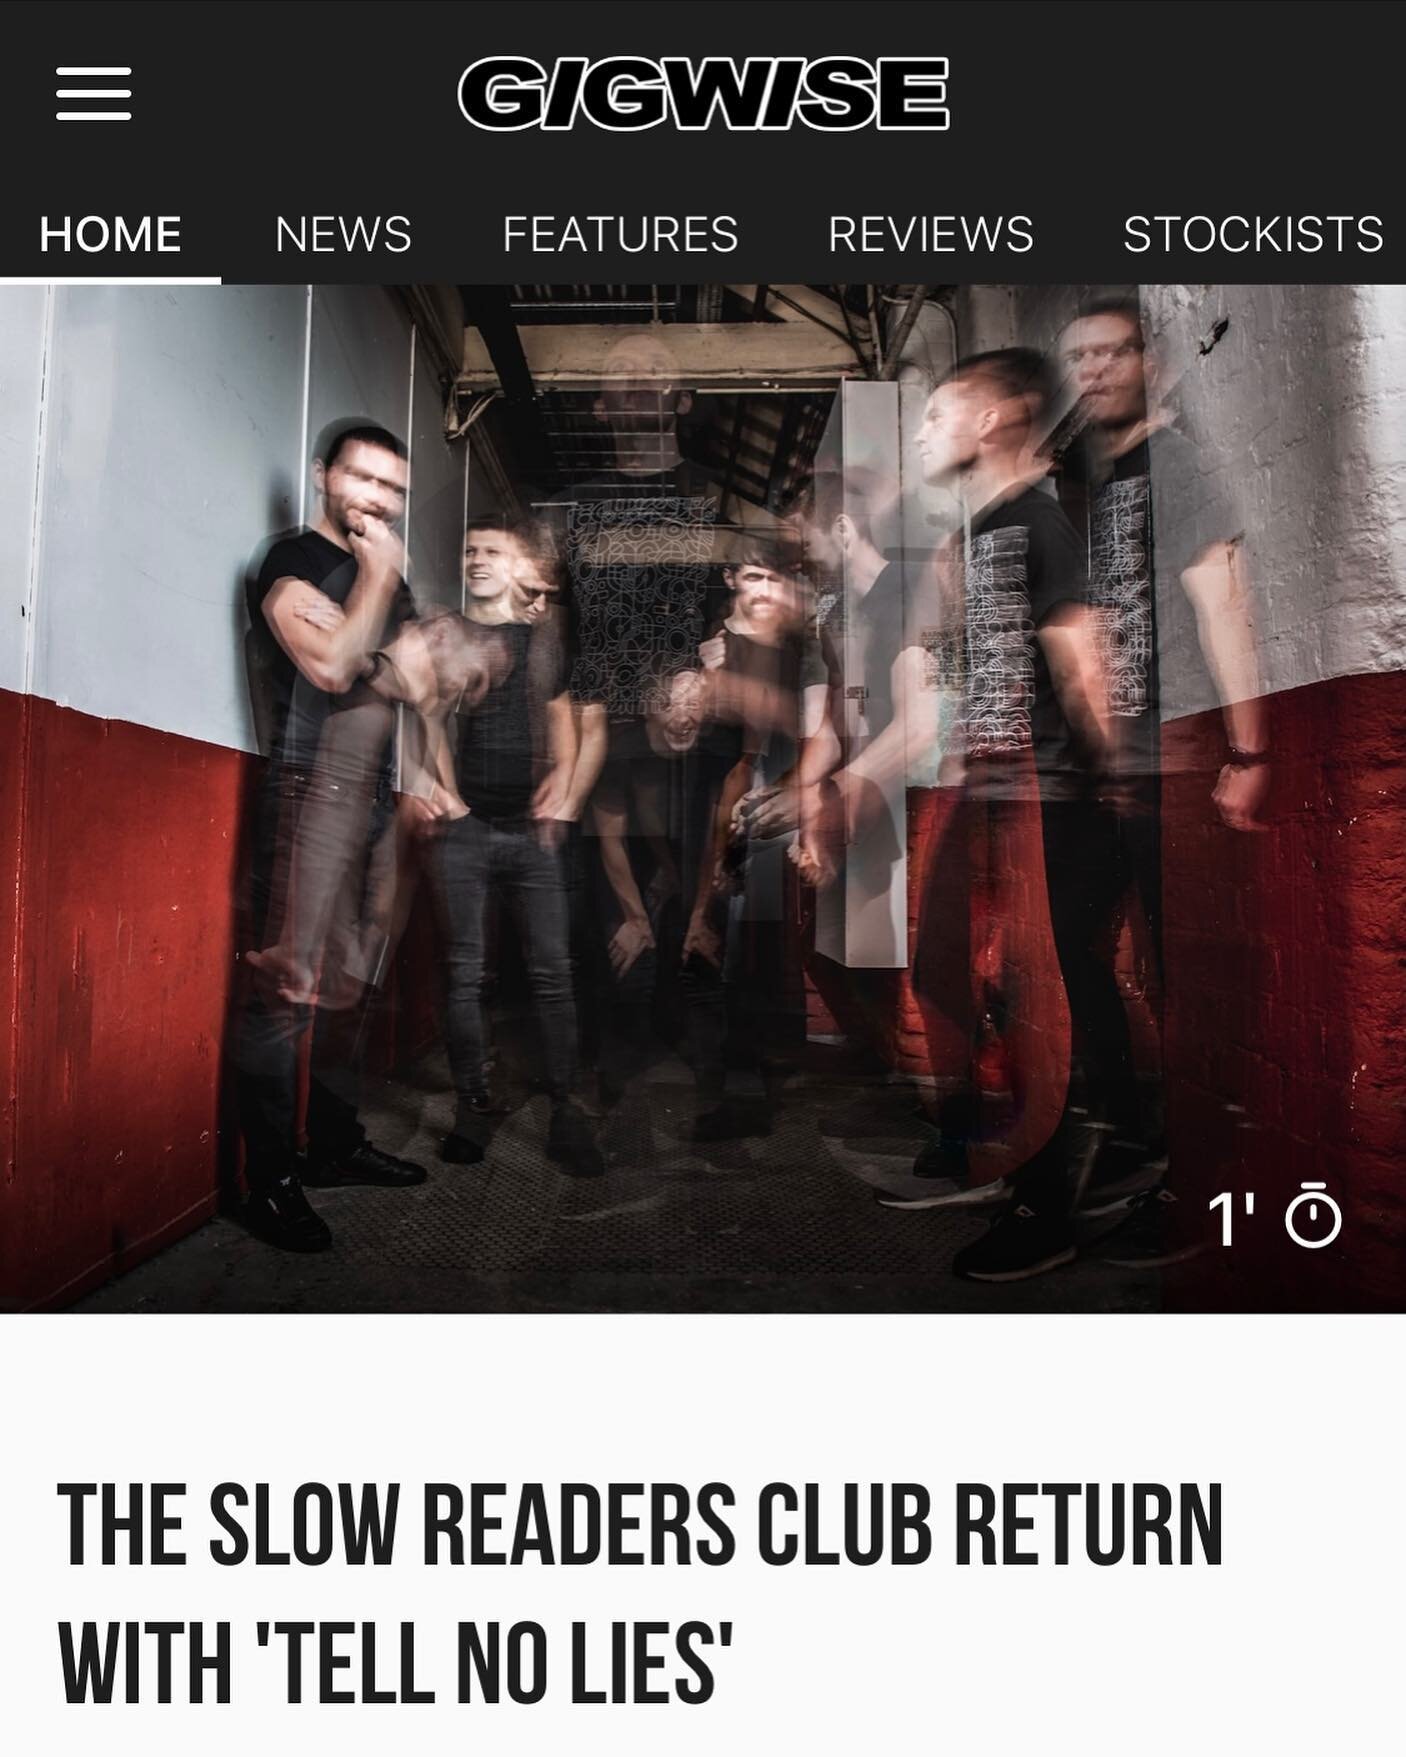 Thank you @gigwise for sharing the new video from @theslowreadersclub ❤️

Thank you @jessieatkinsonxo